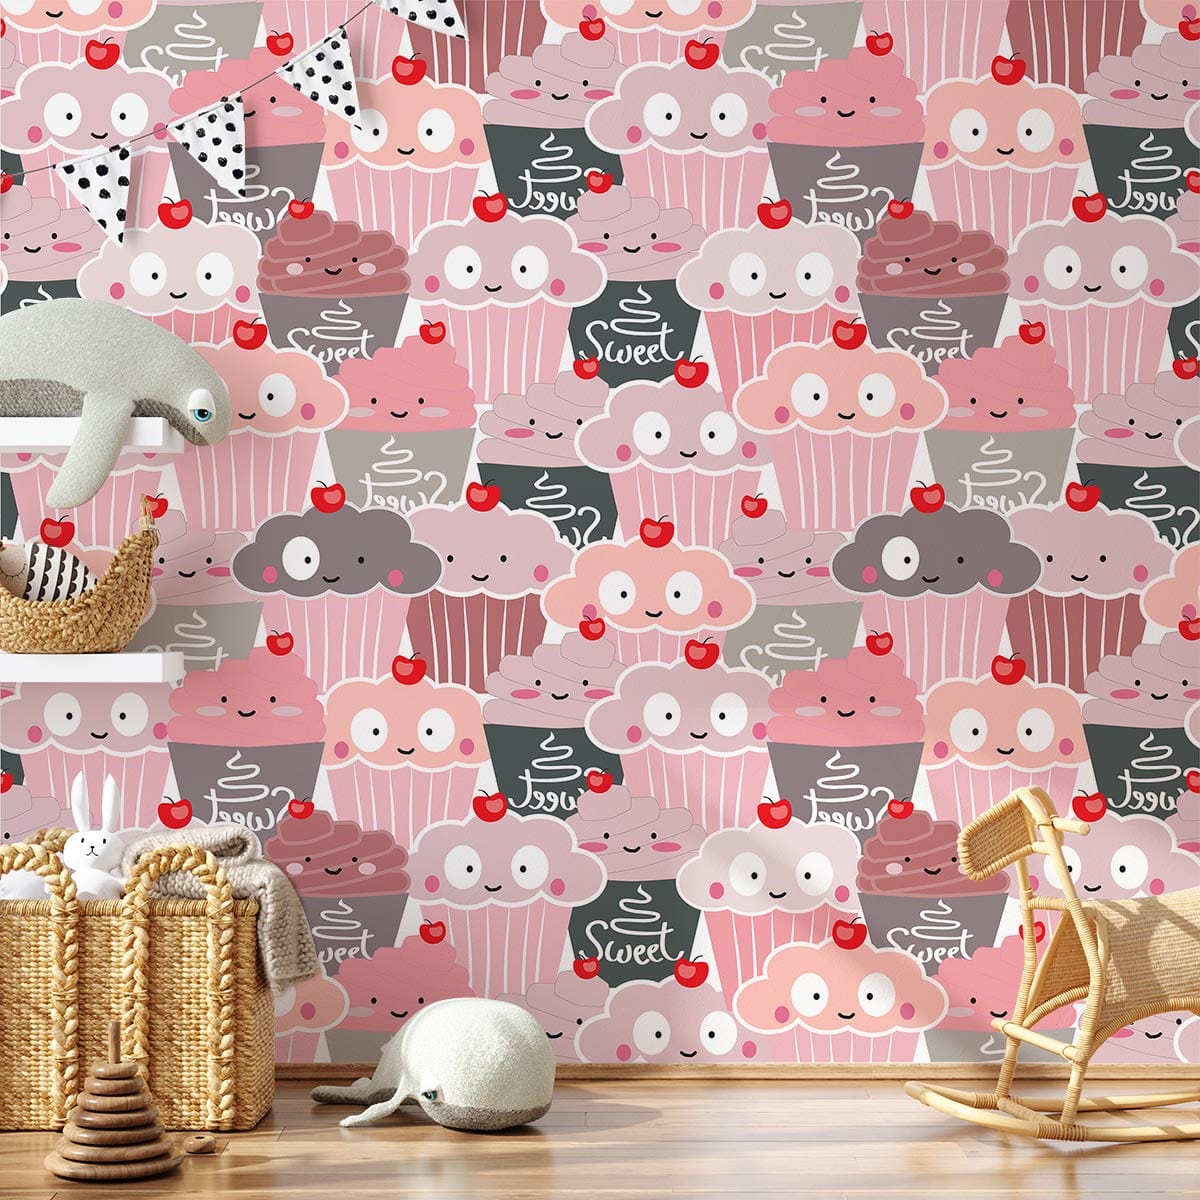 a cartoon ice cream pattern mural designed just for a child's bedroom as a wallpaper mural.